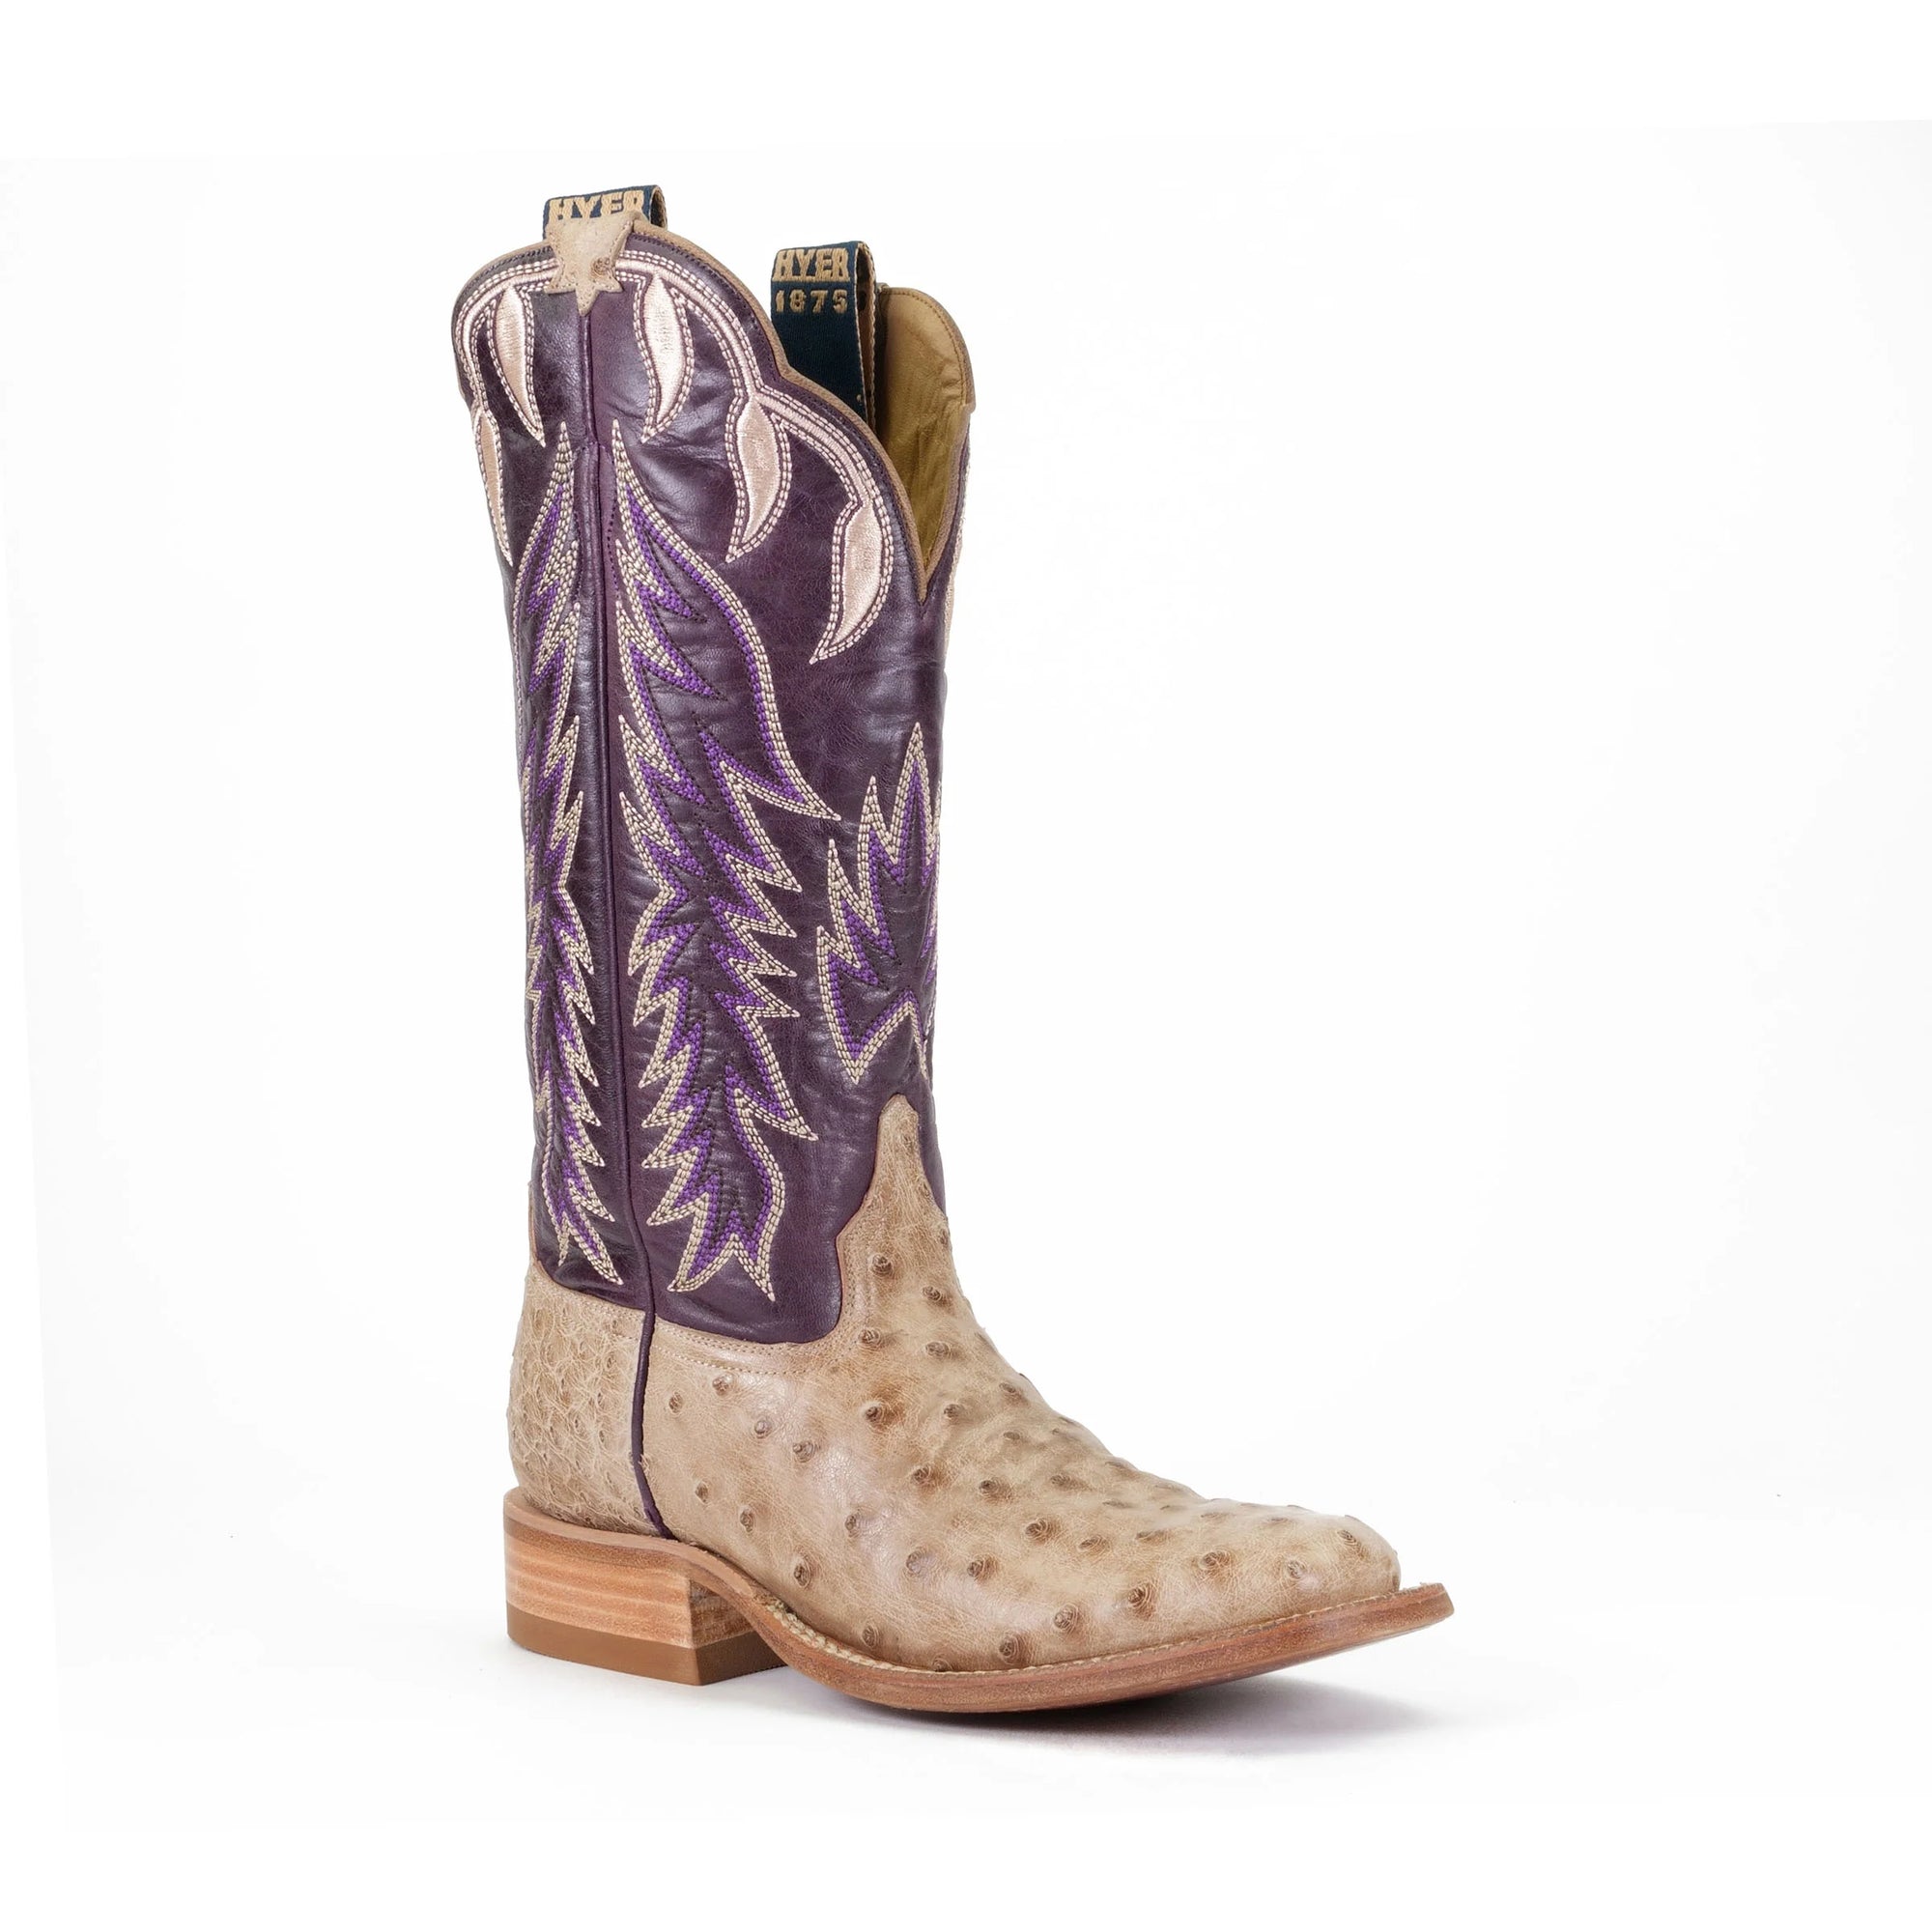 Hyer Boot Co. Women's Full Quill Ostrich Boot STYLE HW41007